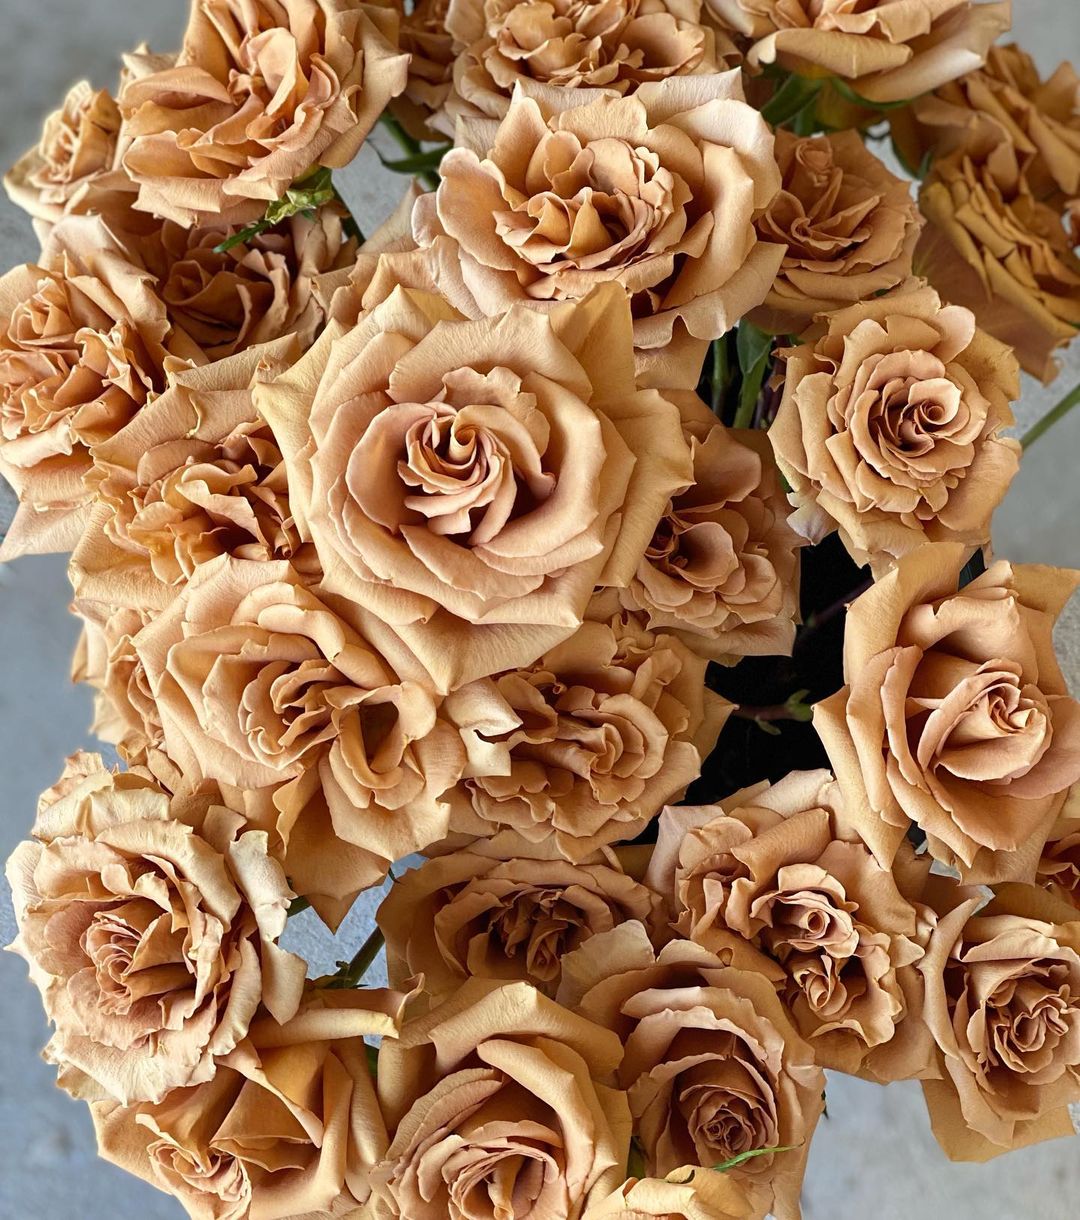 Toffee roses from Brown Breeding - on Thursd